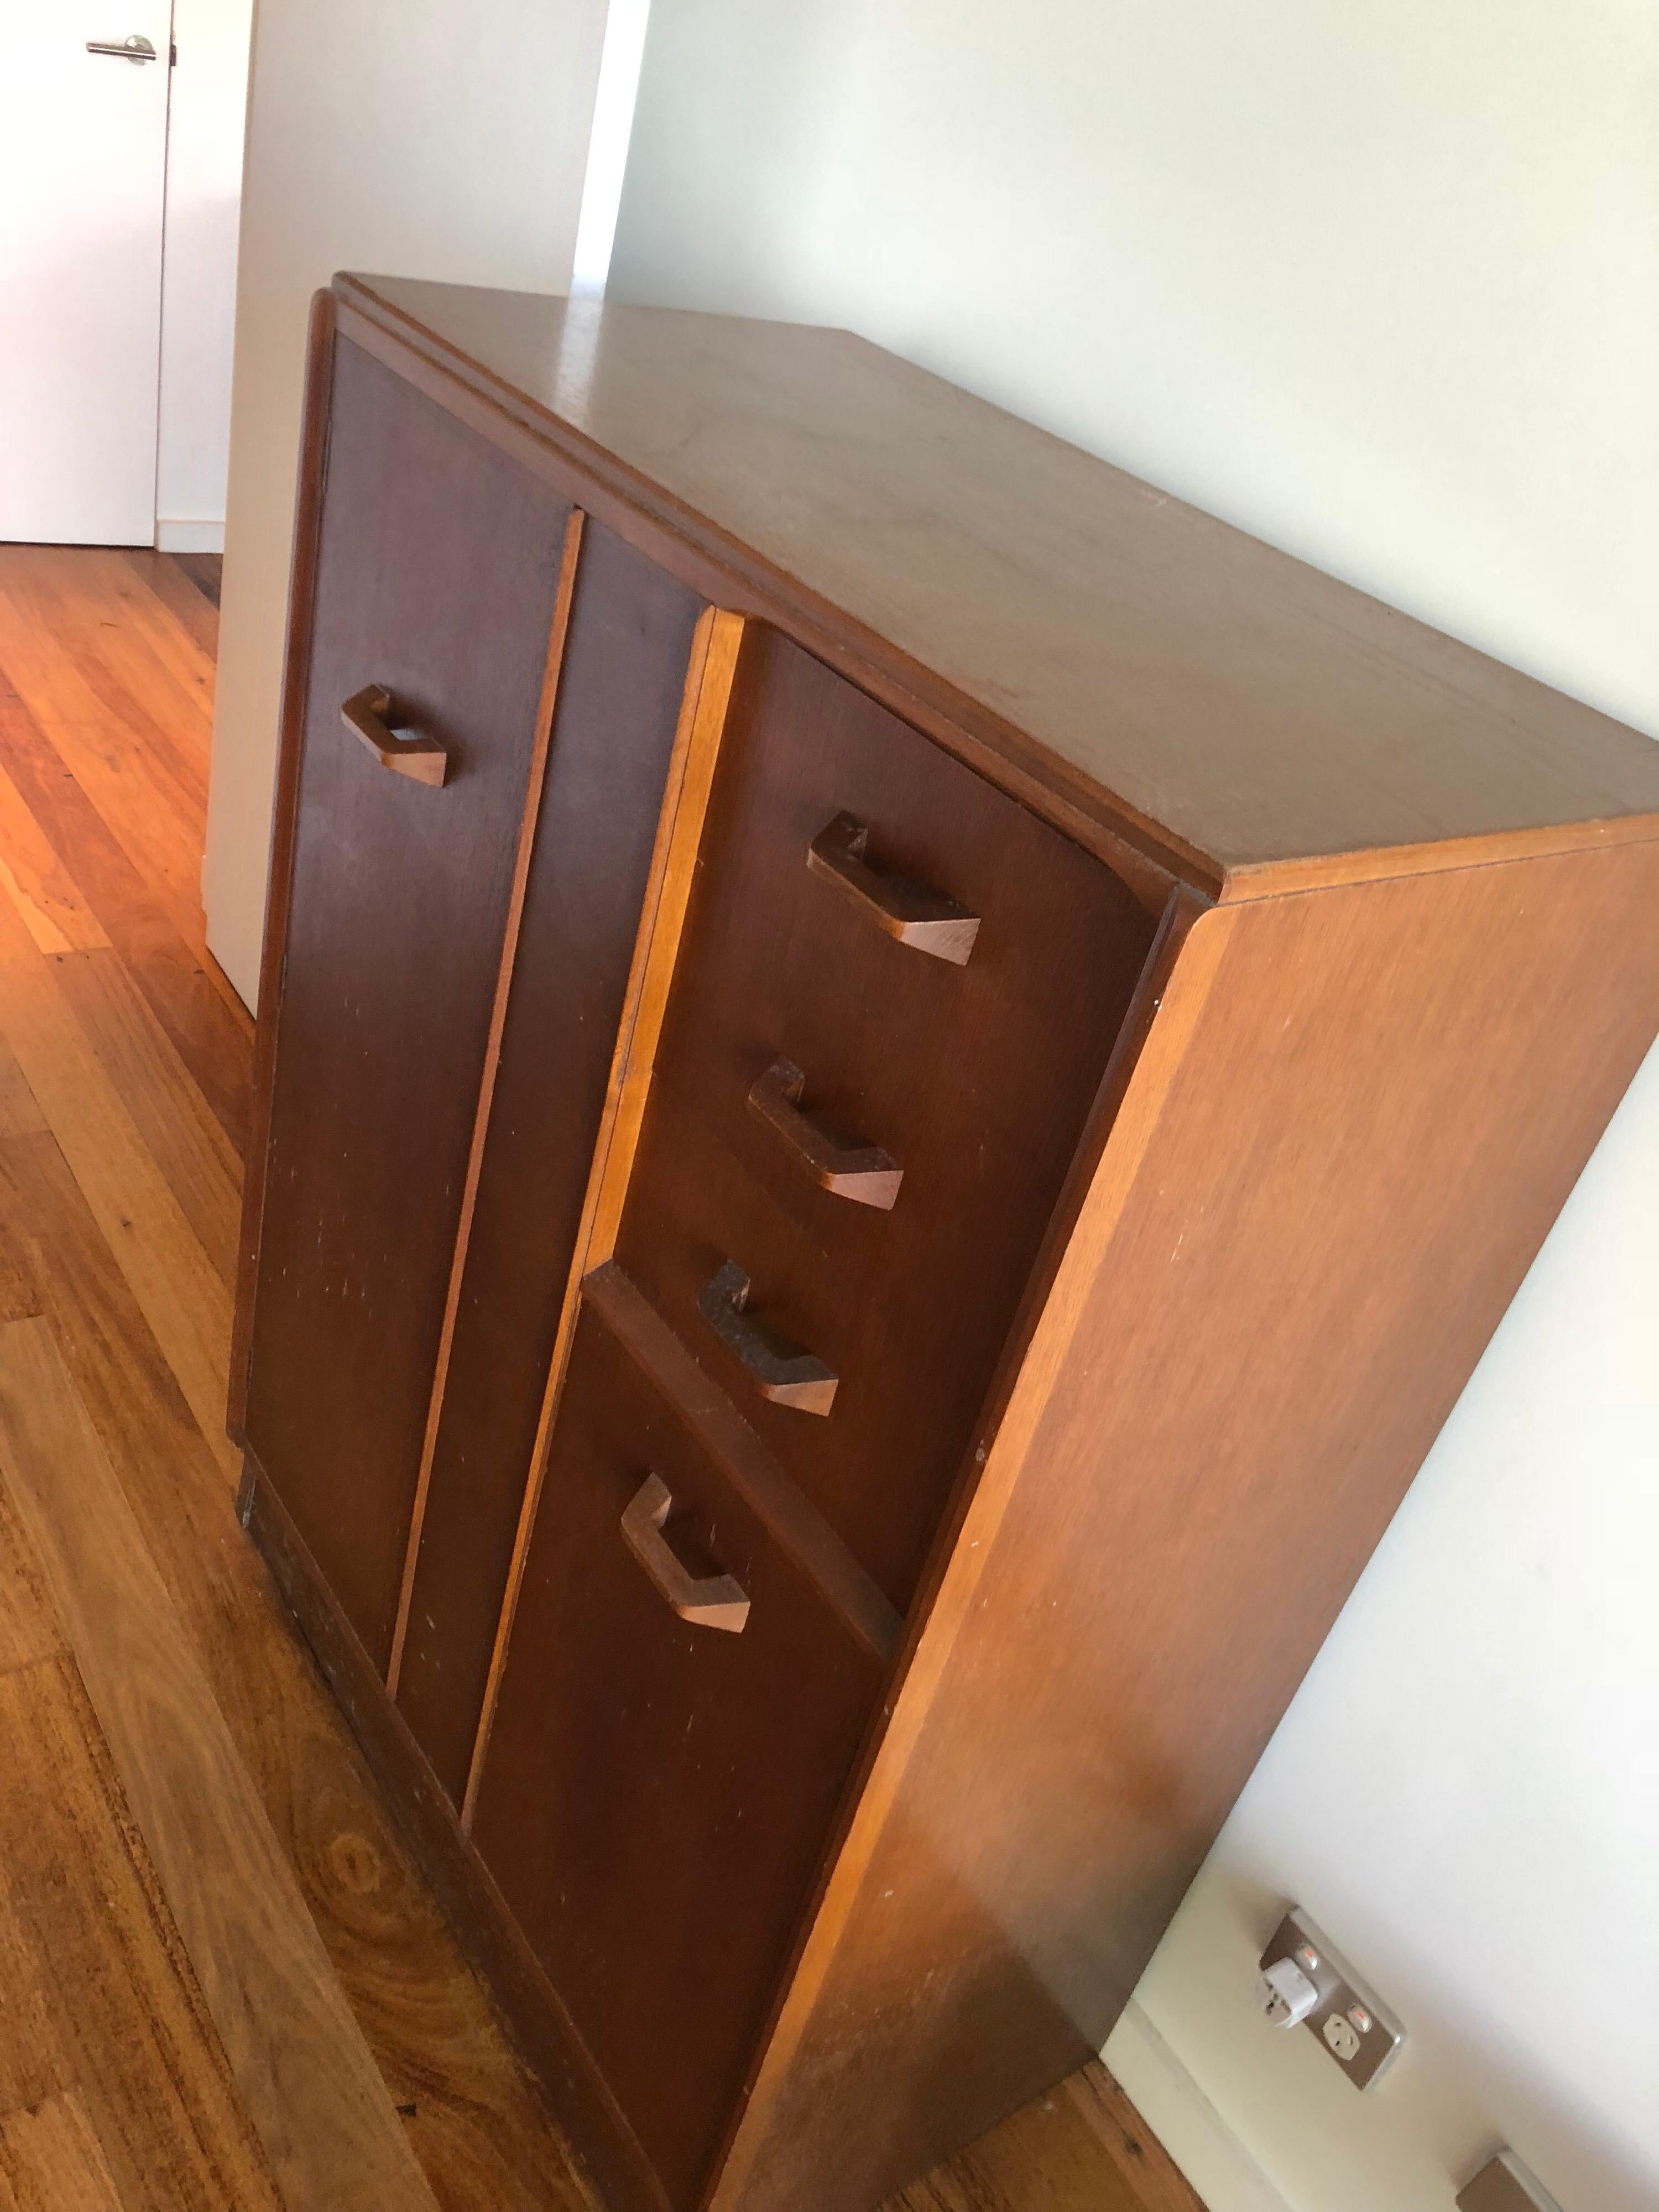 G Plan E Gomme Gentleman’s Wardrobe or Tall Boy In Good Condition For Sale In Church Point, NSW